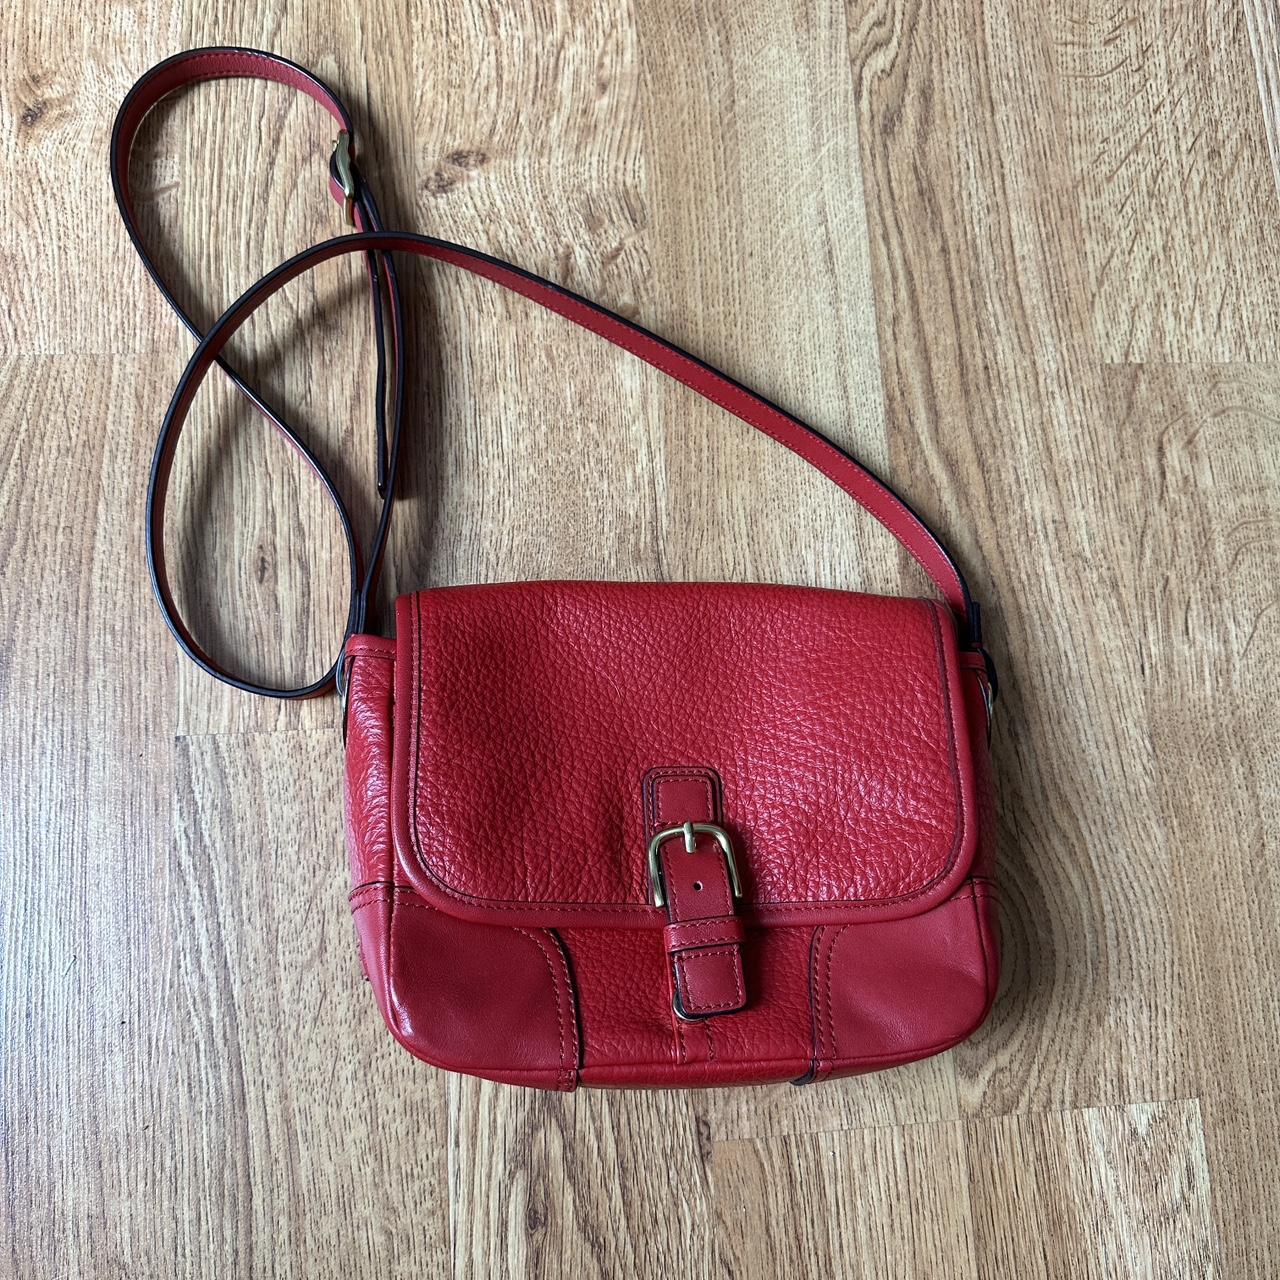 Red genuine leather coach cross body purse, No flaws